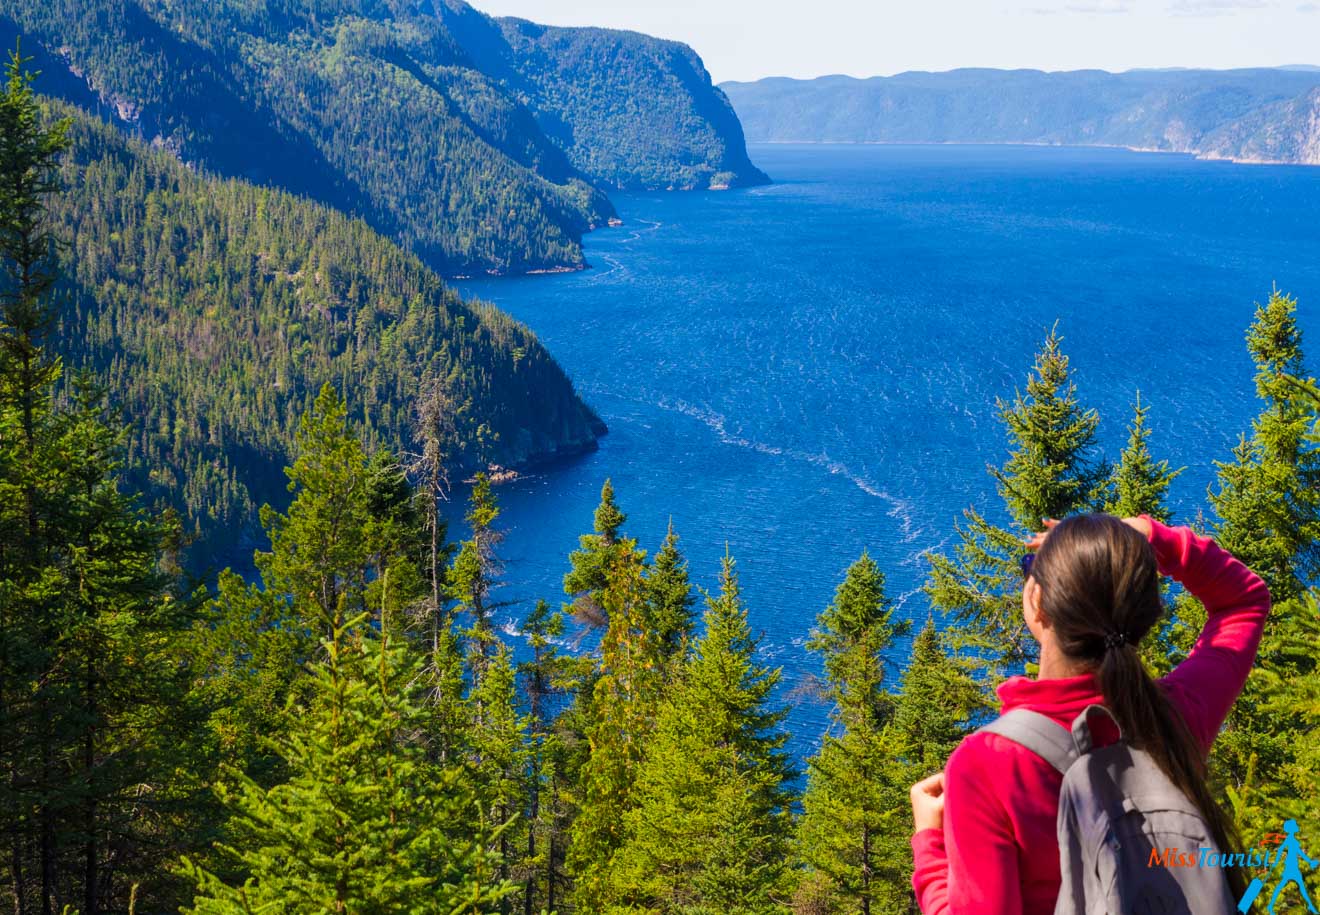 The author of the post in a red jacket looks out over a stunning fjord with deep blue water and lush green forested cliffs.